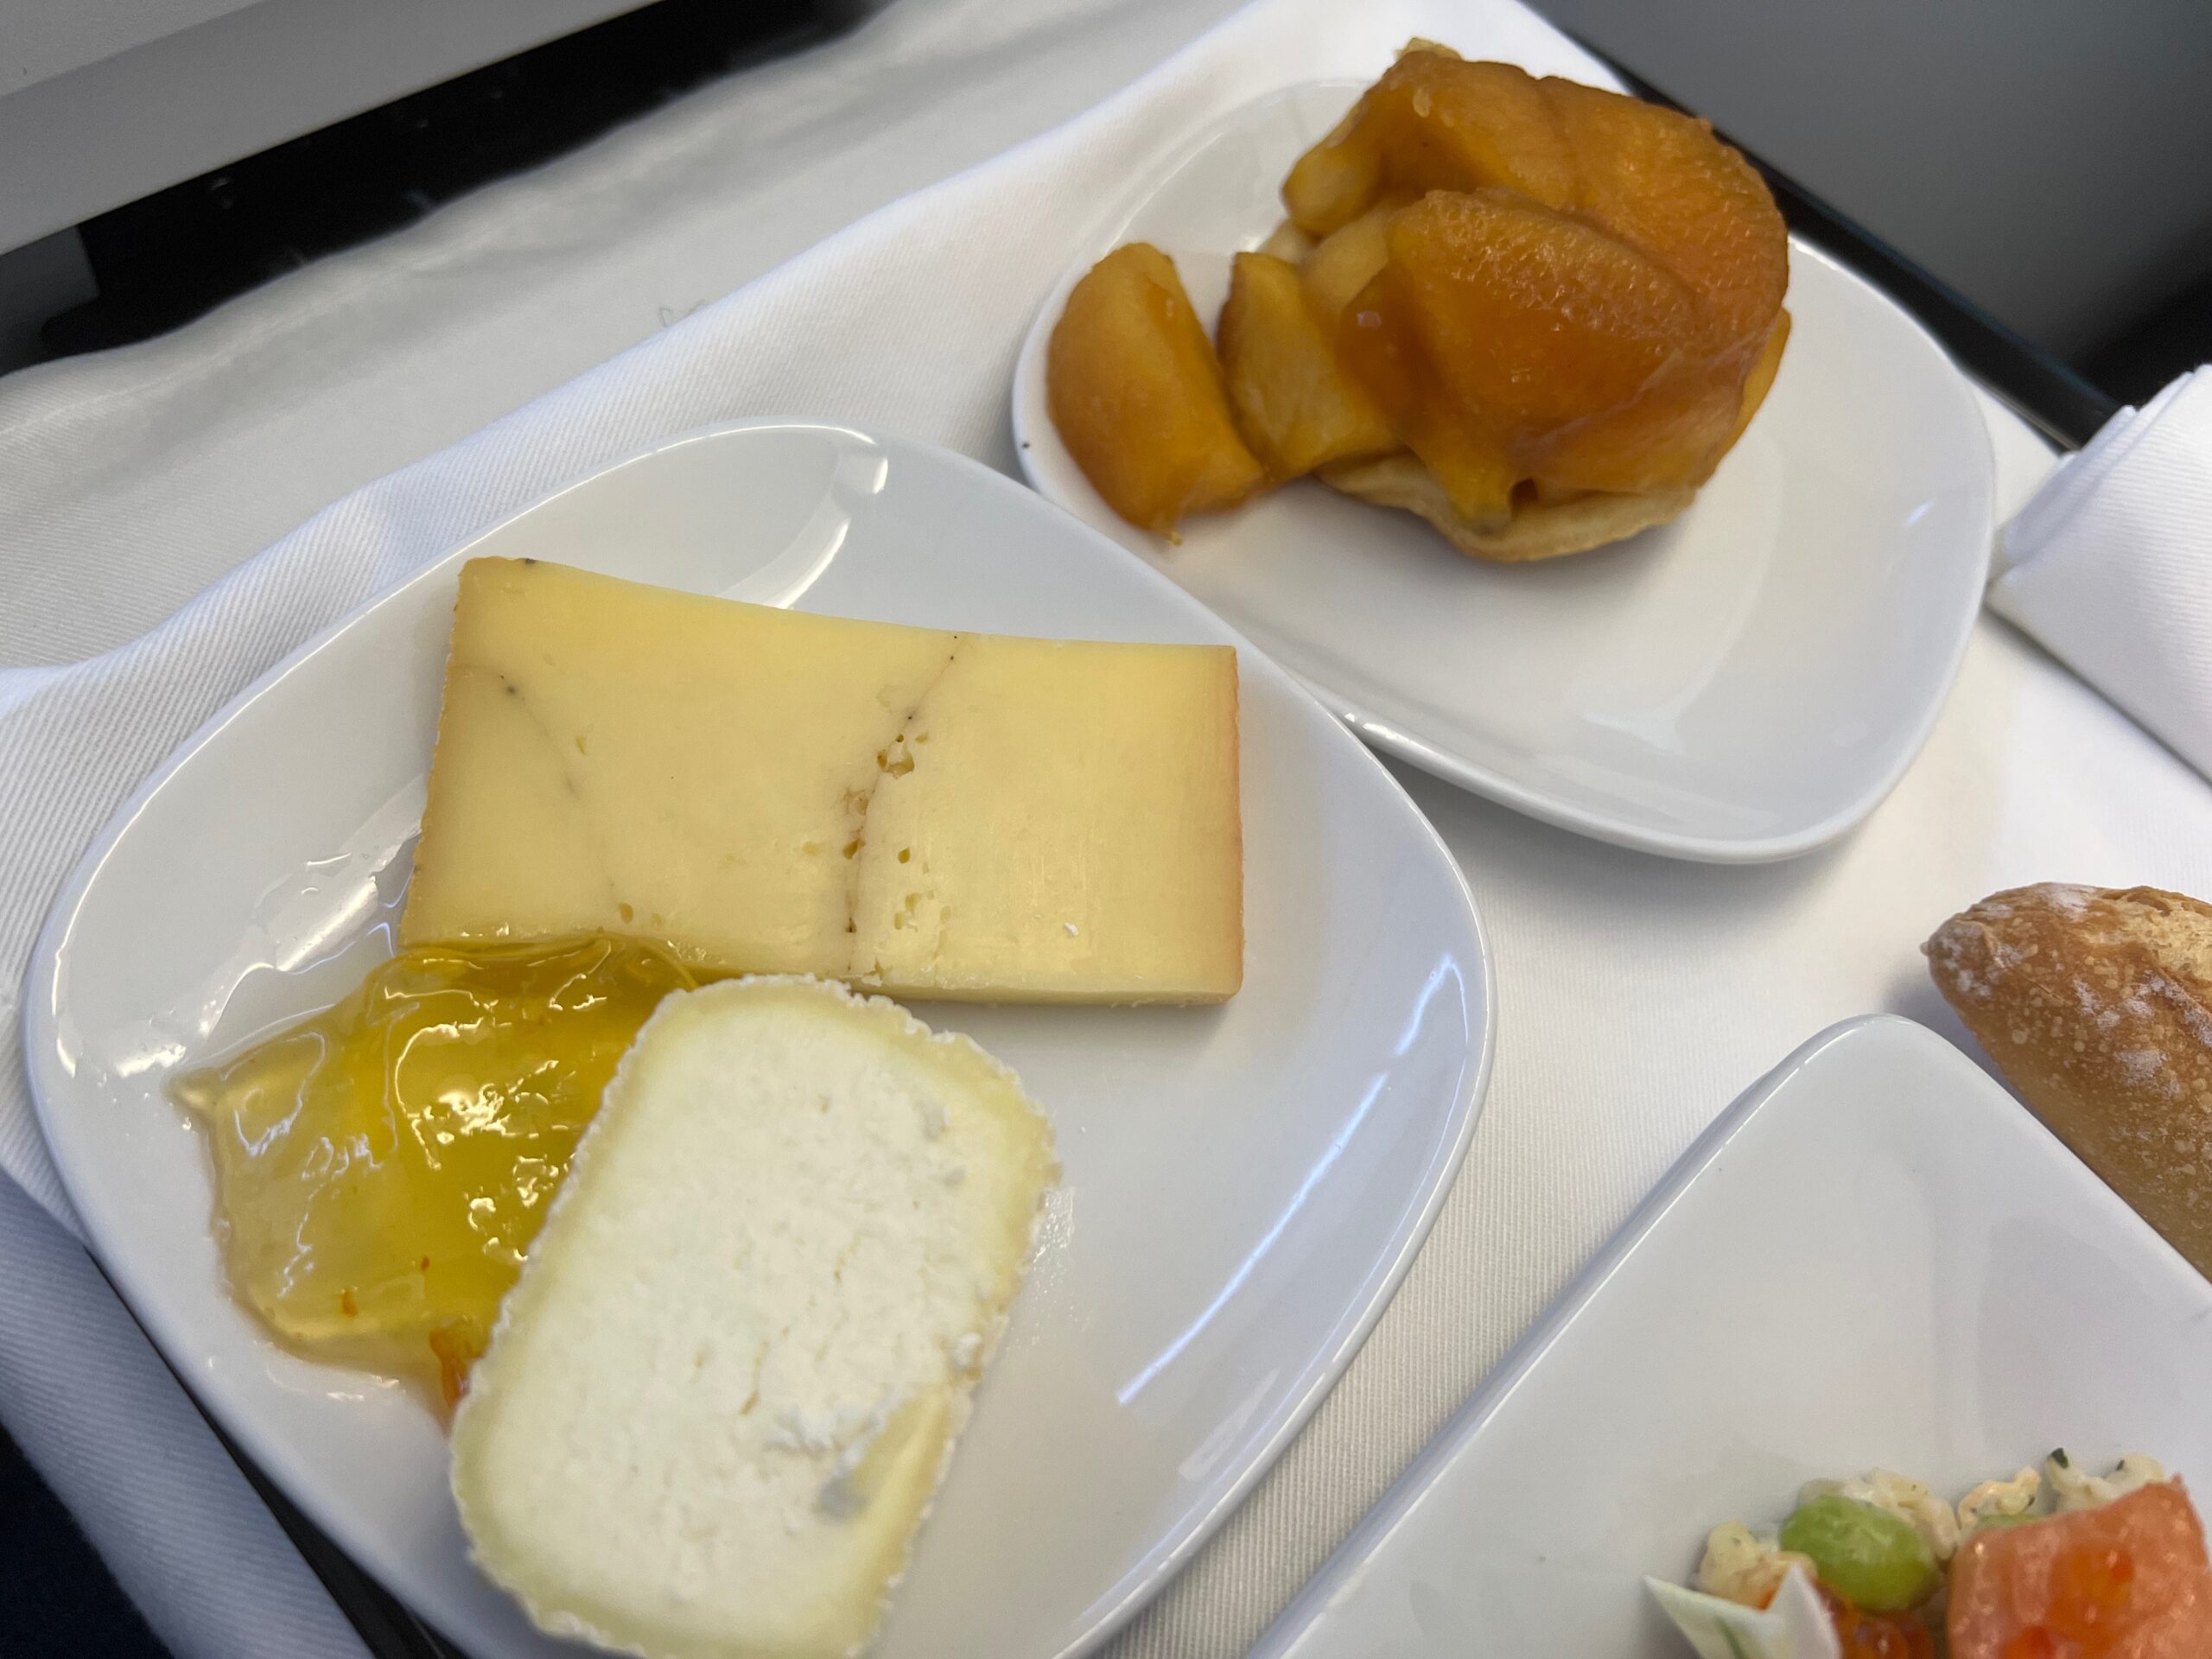 Flying on La Compagnie all-business class airline from Paris to New York &mdash; the cheese plate and apple tart.